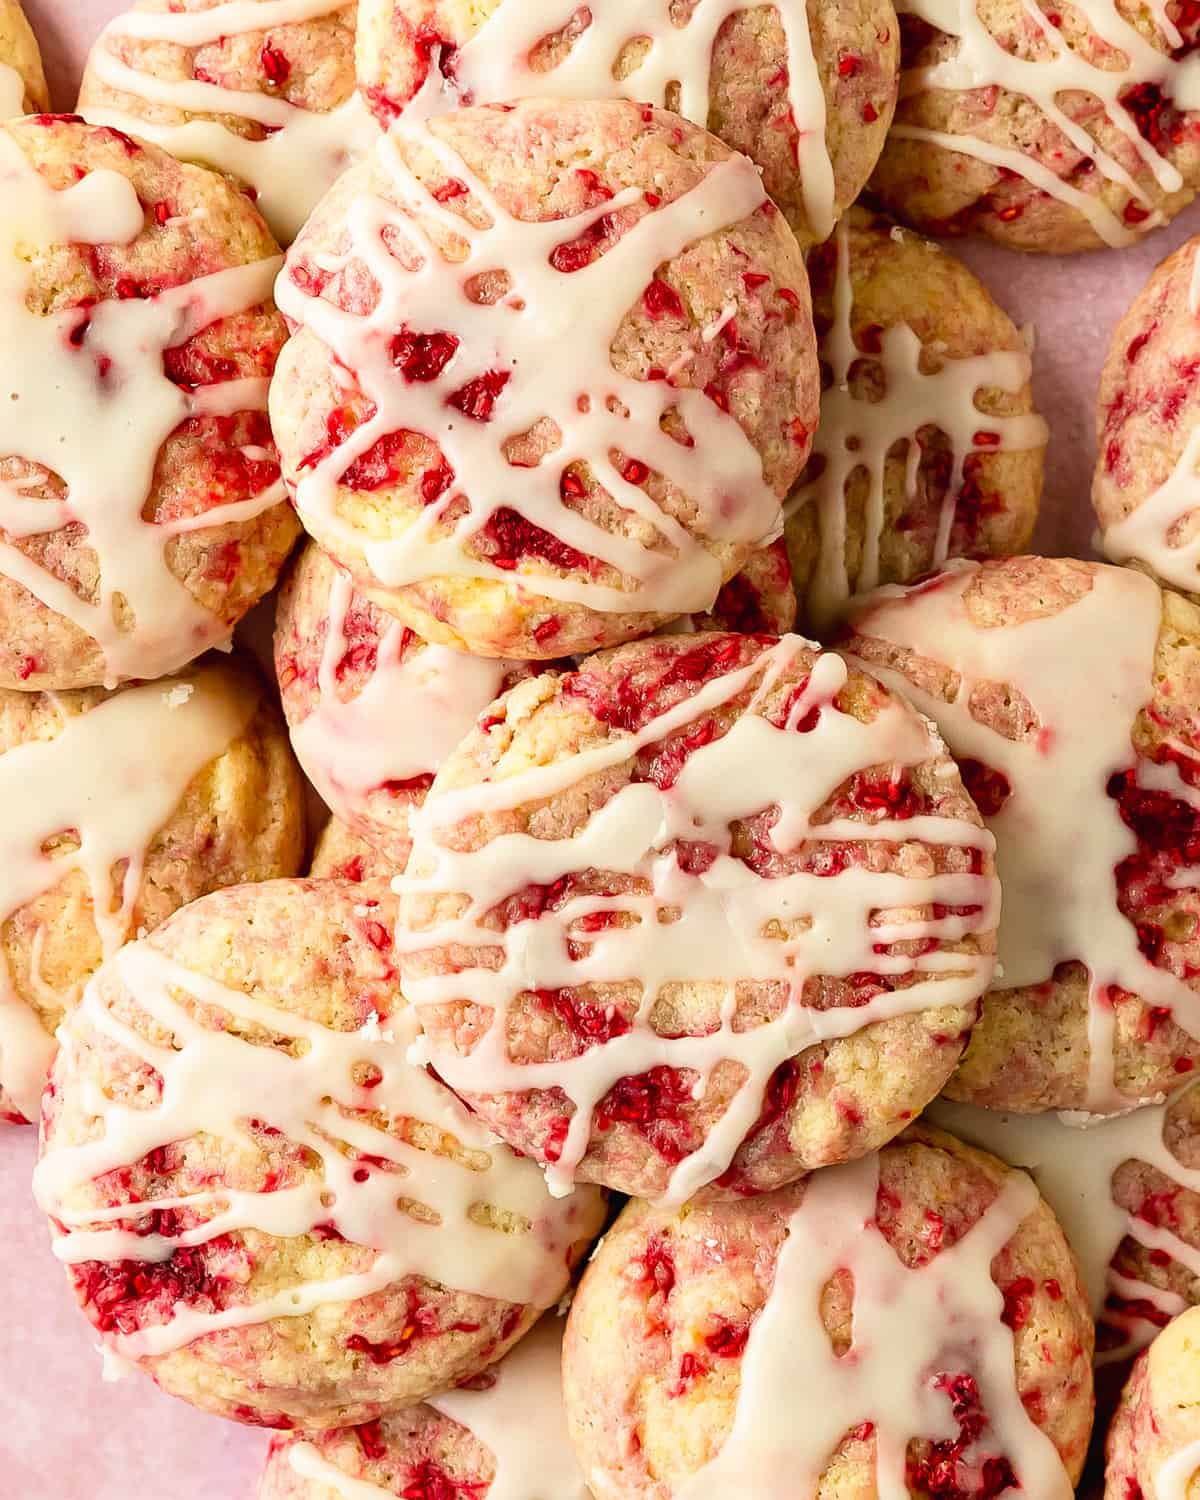 Lemon raspberry cookies are sweet. buttery, soft and fluffy lemon cookies filled with swirls of tart raspberries. Top these raspberry lemon cookies with a fresh lemon glaze for even more lemon flavor. This lemon and raspberry cookie recipe is no chill and easy to make in one bowl. 